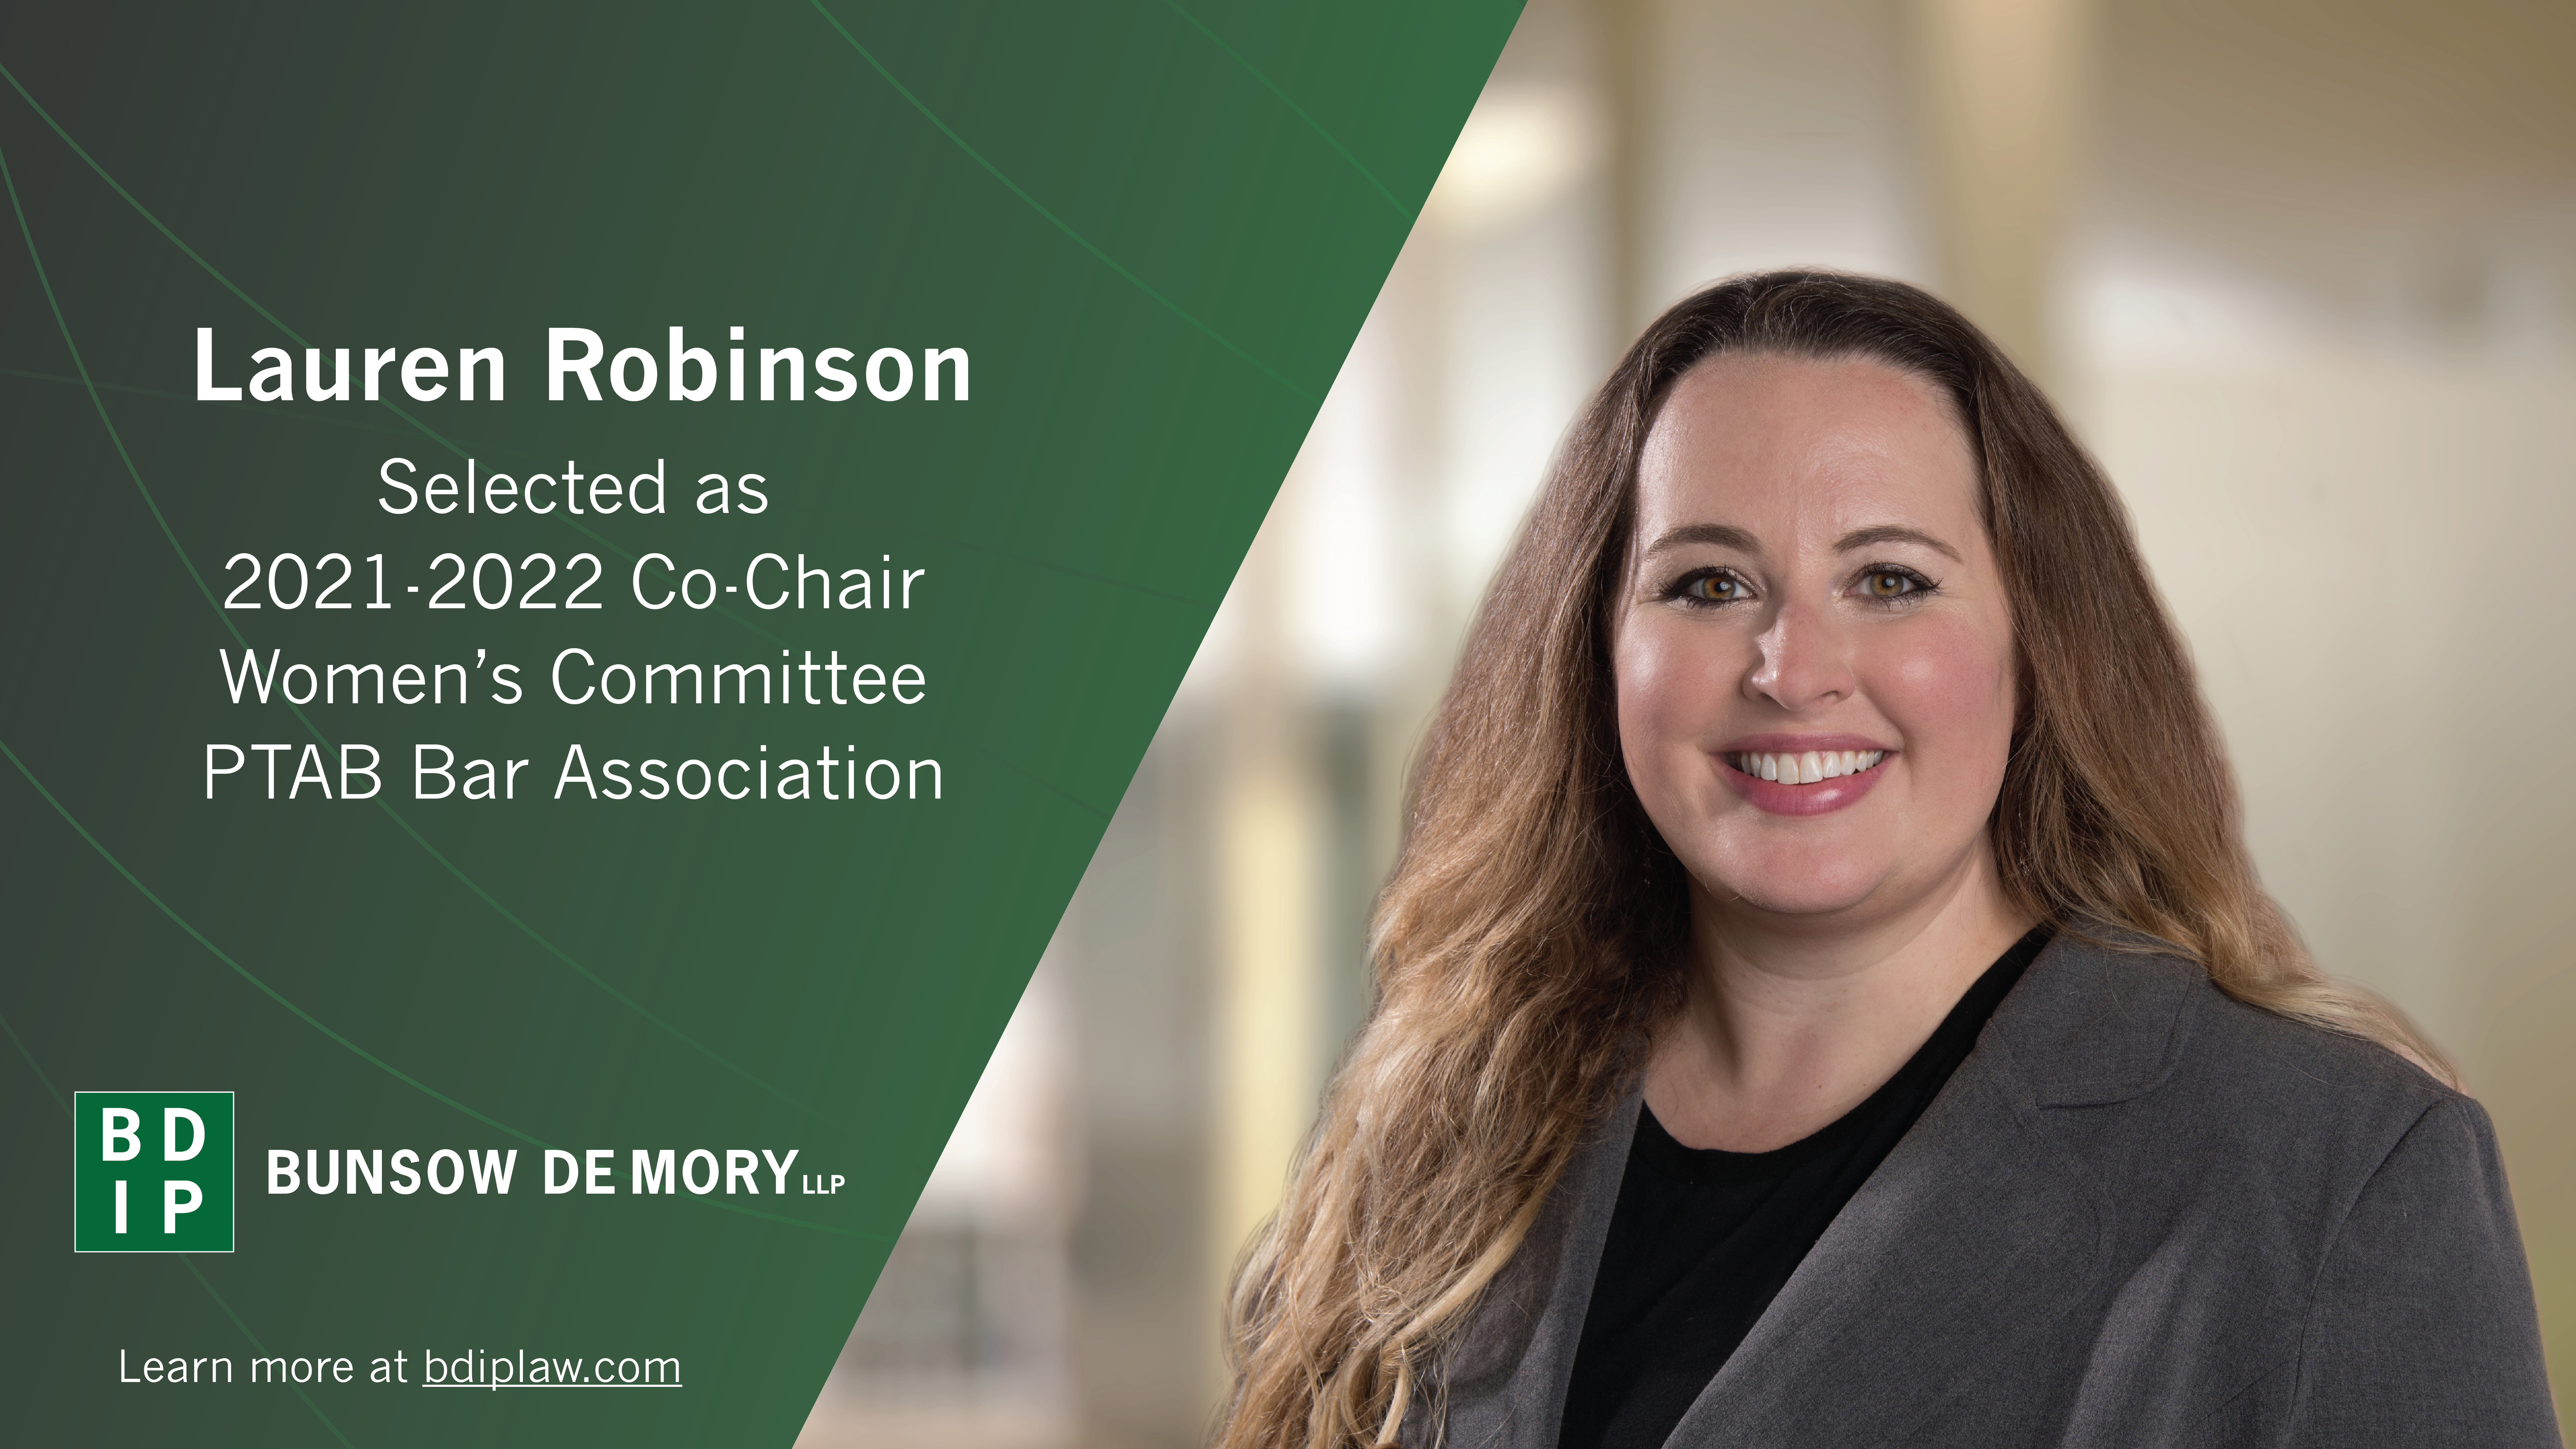 Lauren Robinson Selected as 2021-2022 Co-Chair for the PTAB Bar Association’s Women’s Committee